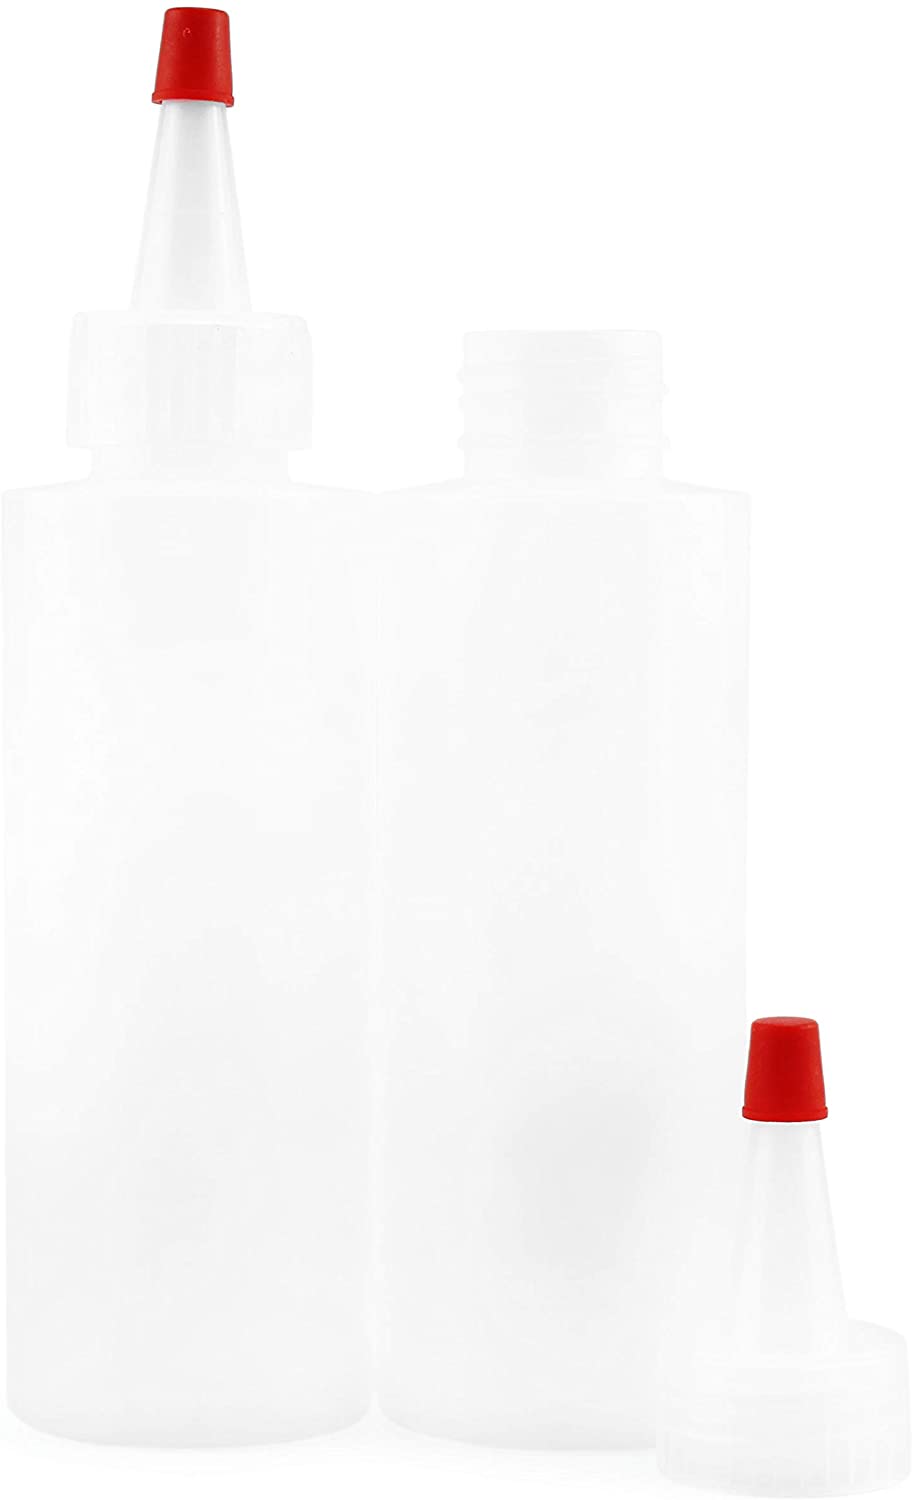 4oz HDPE Plastic Squeeze Bottles w/Yorker Tips (6-Pack) - sh1327cb04oz